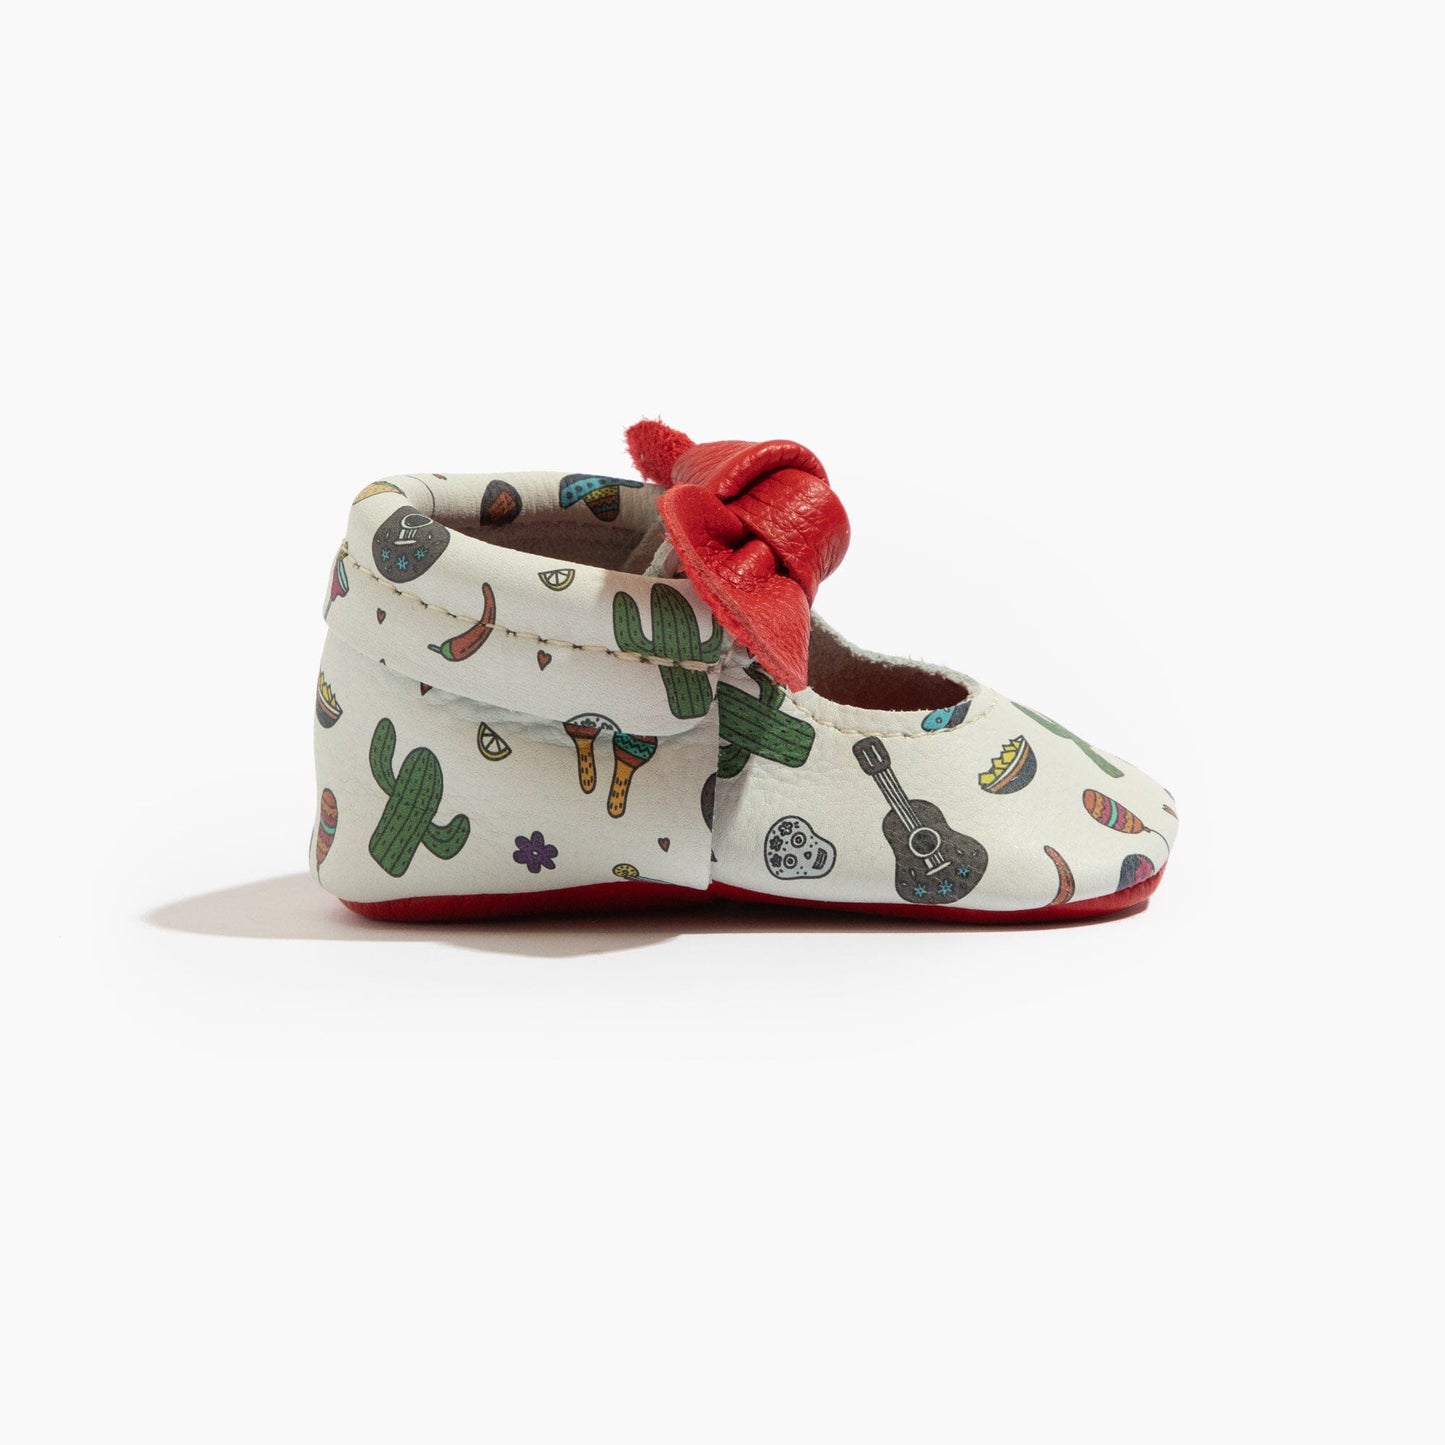 Fiesta Knotted Bow Mocc Moccasin Soft Sole 